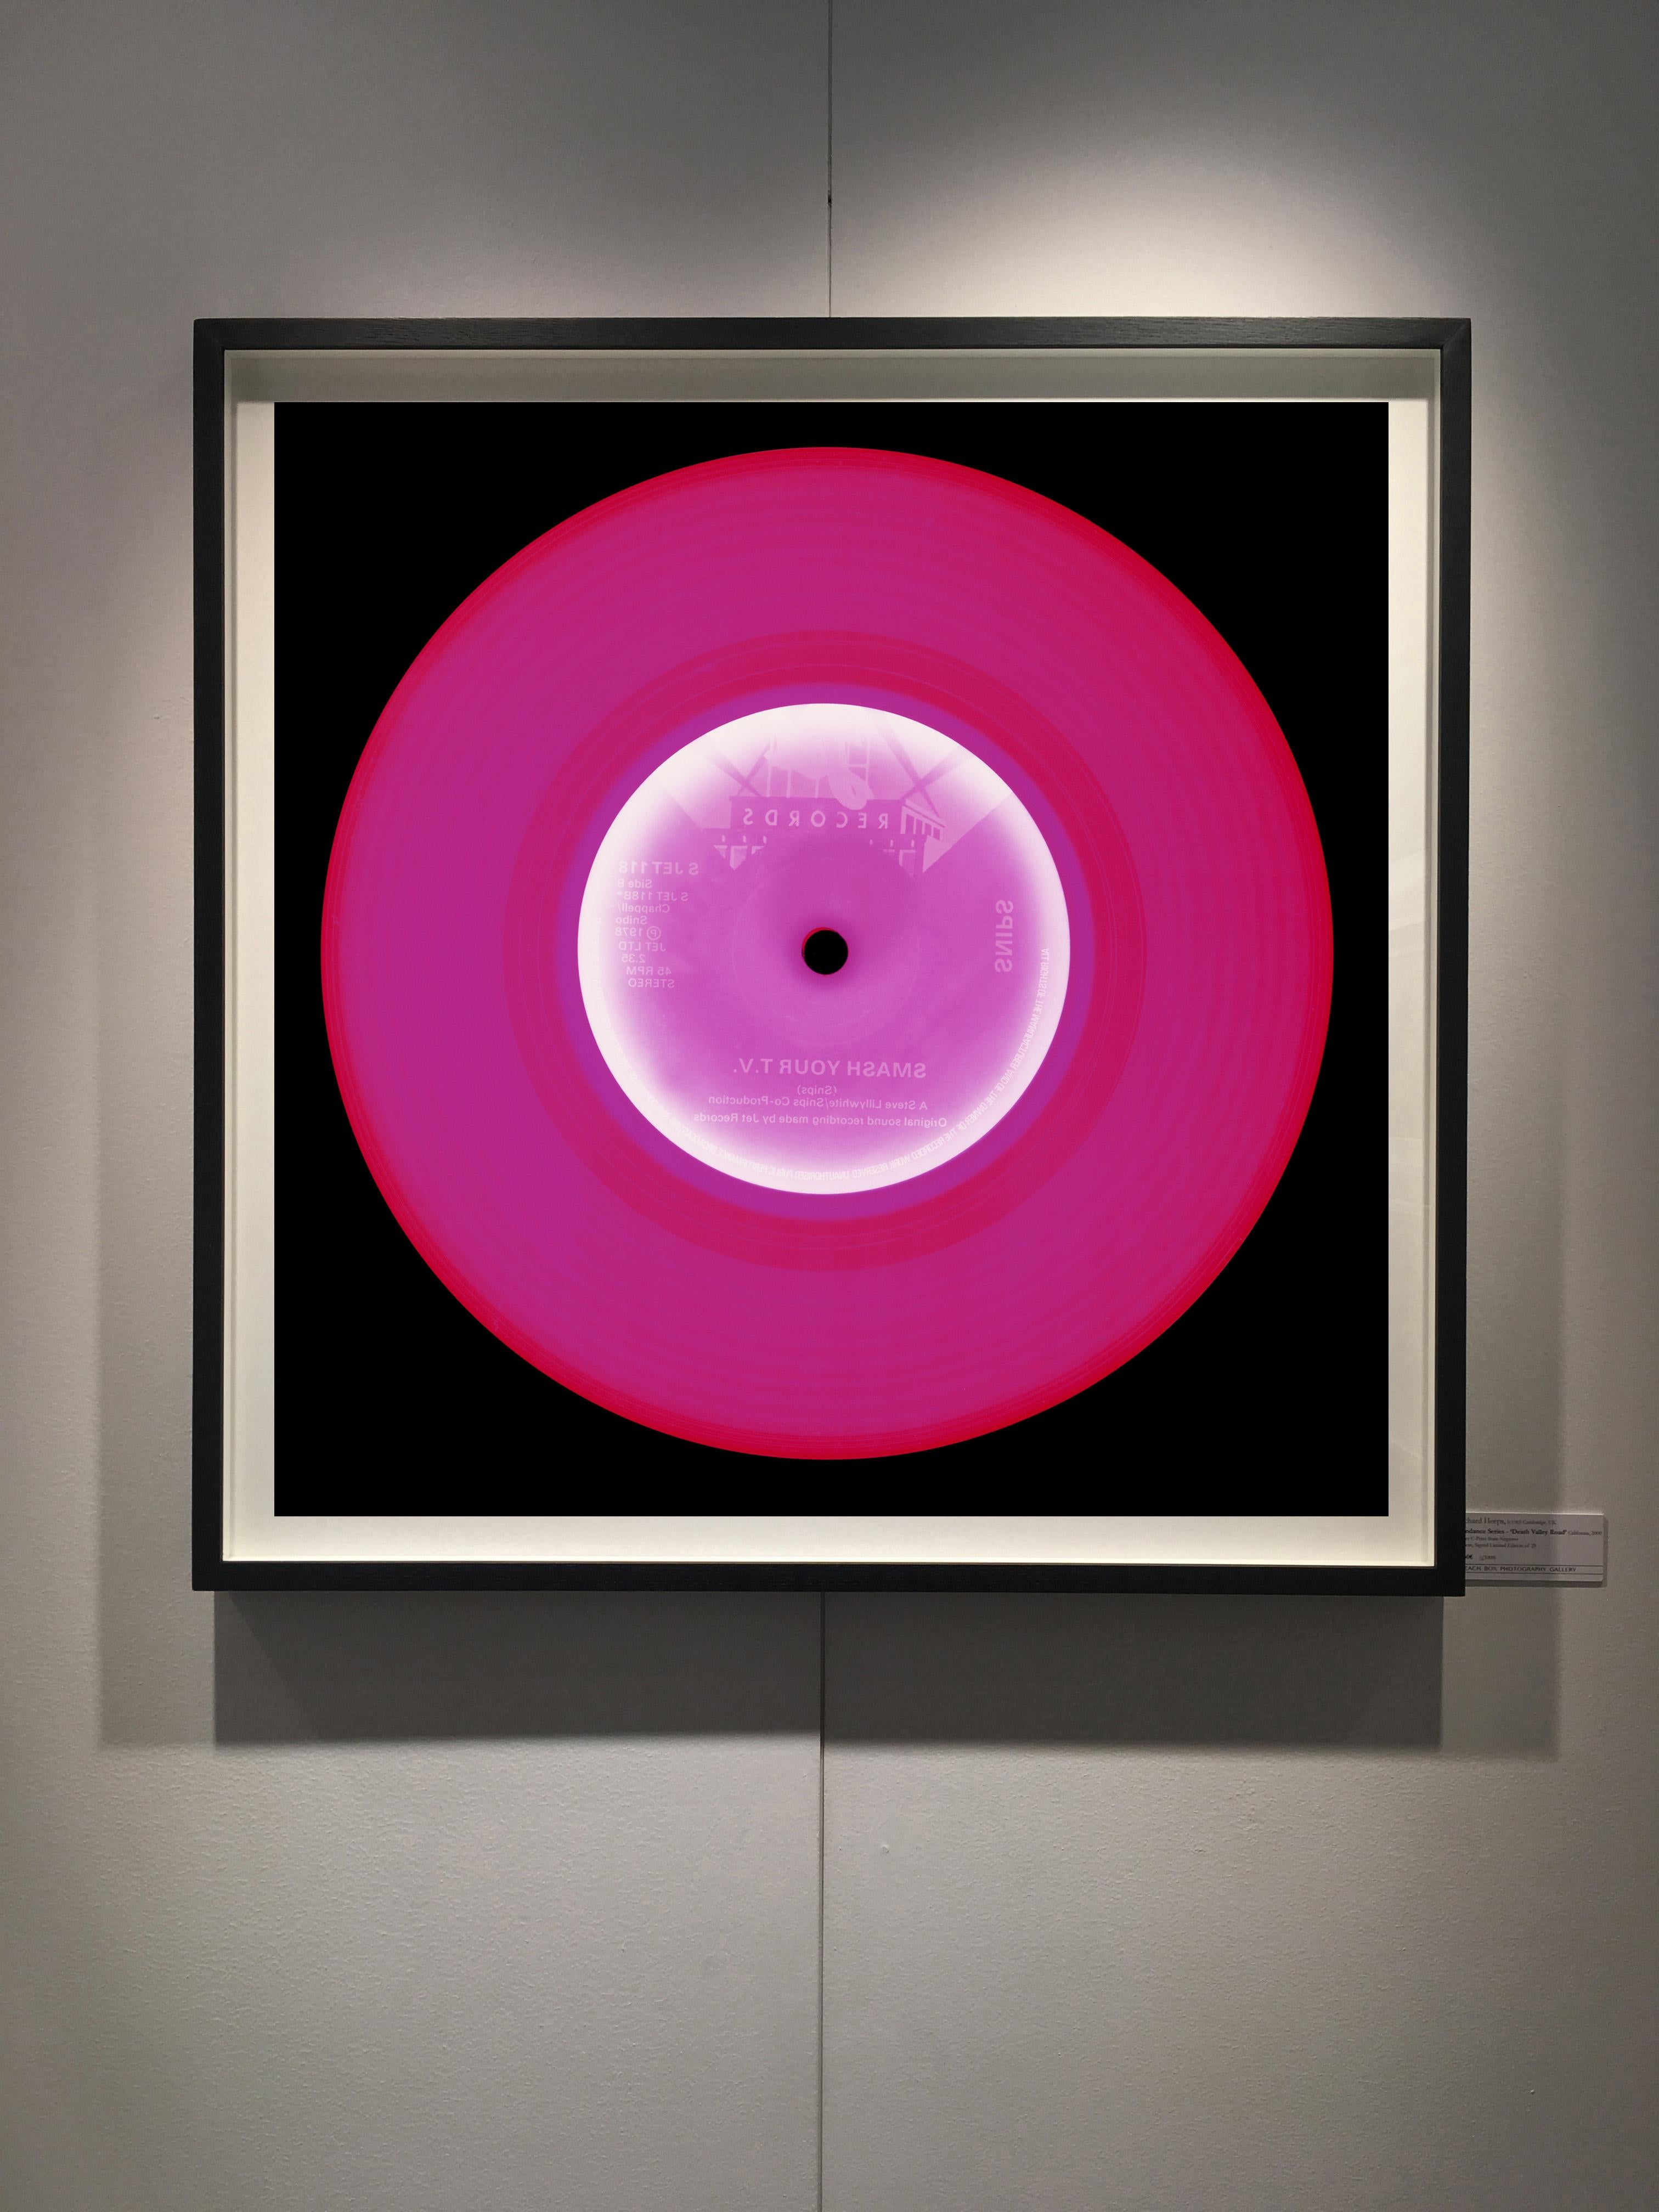 Vinyl Collection, Side B (Pink) - Conceptual, Pop Art, Color, Photography - Print by Heidler & Heeps